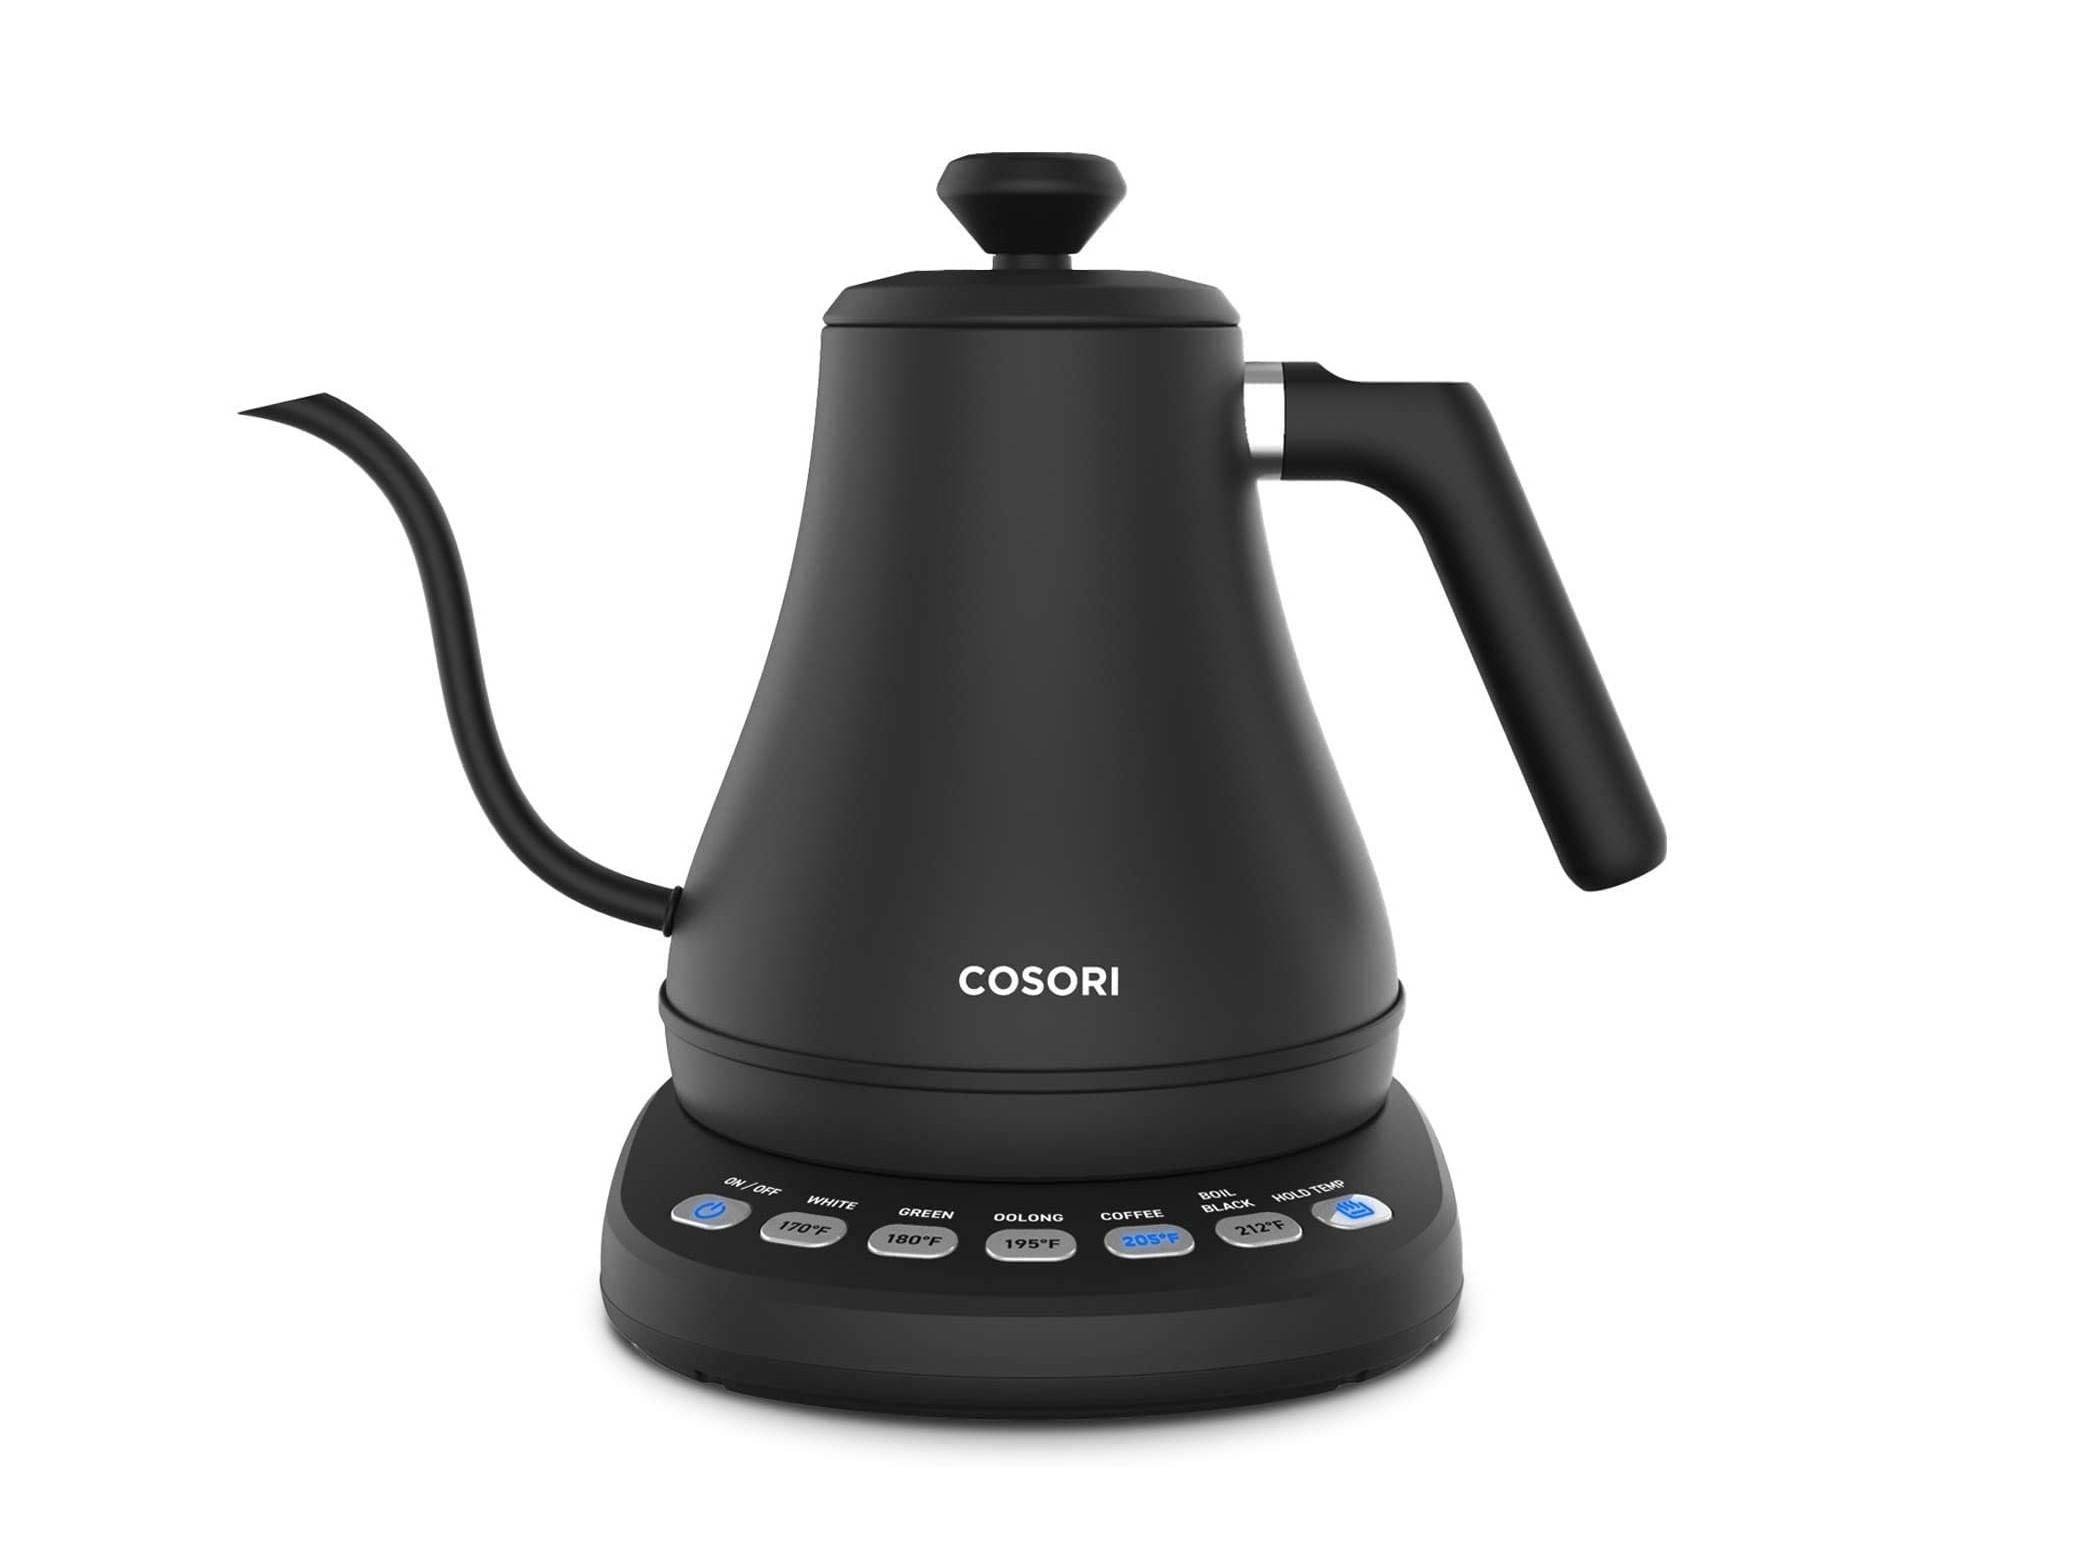 https://www.themanual.com/wp-content/uploads/sites/9/2022/07/Cosori-Electric-Gooseneck-Kettle-product-image.jpg?fit=800%2C800&p=1